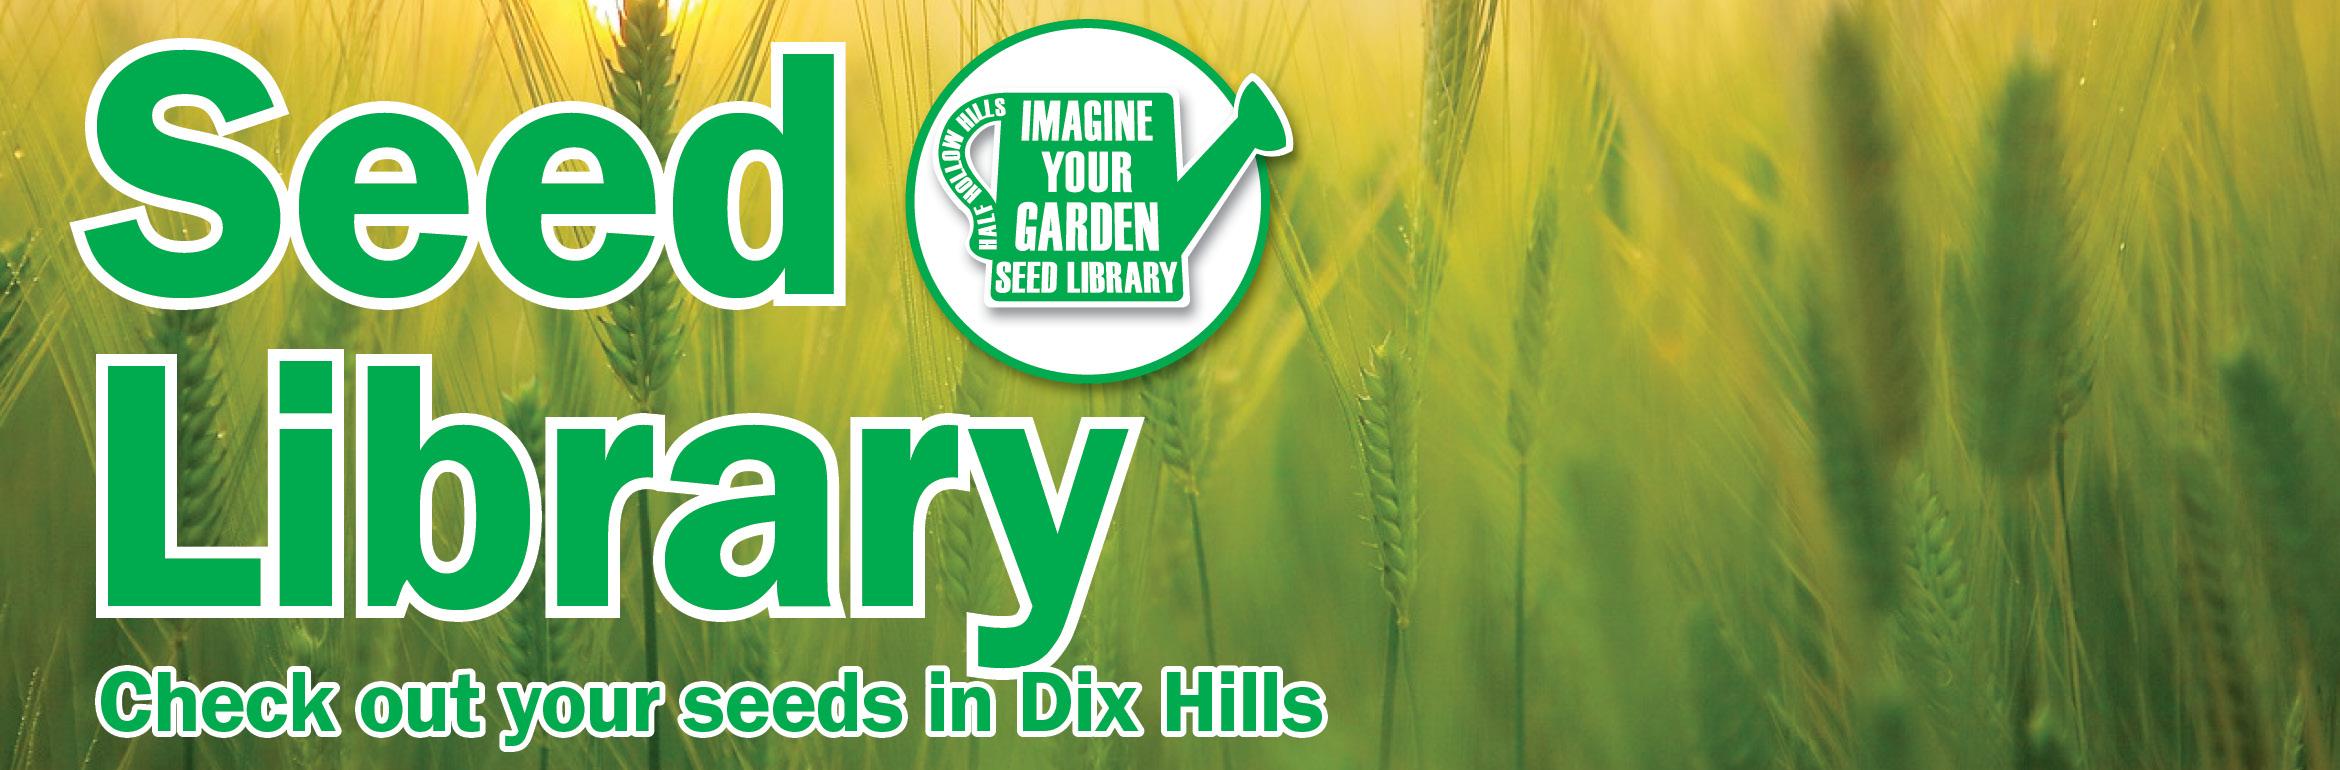 Seed Library. Check out your seeds in Dix Hills.